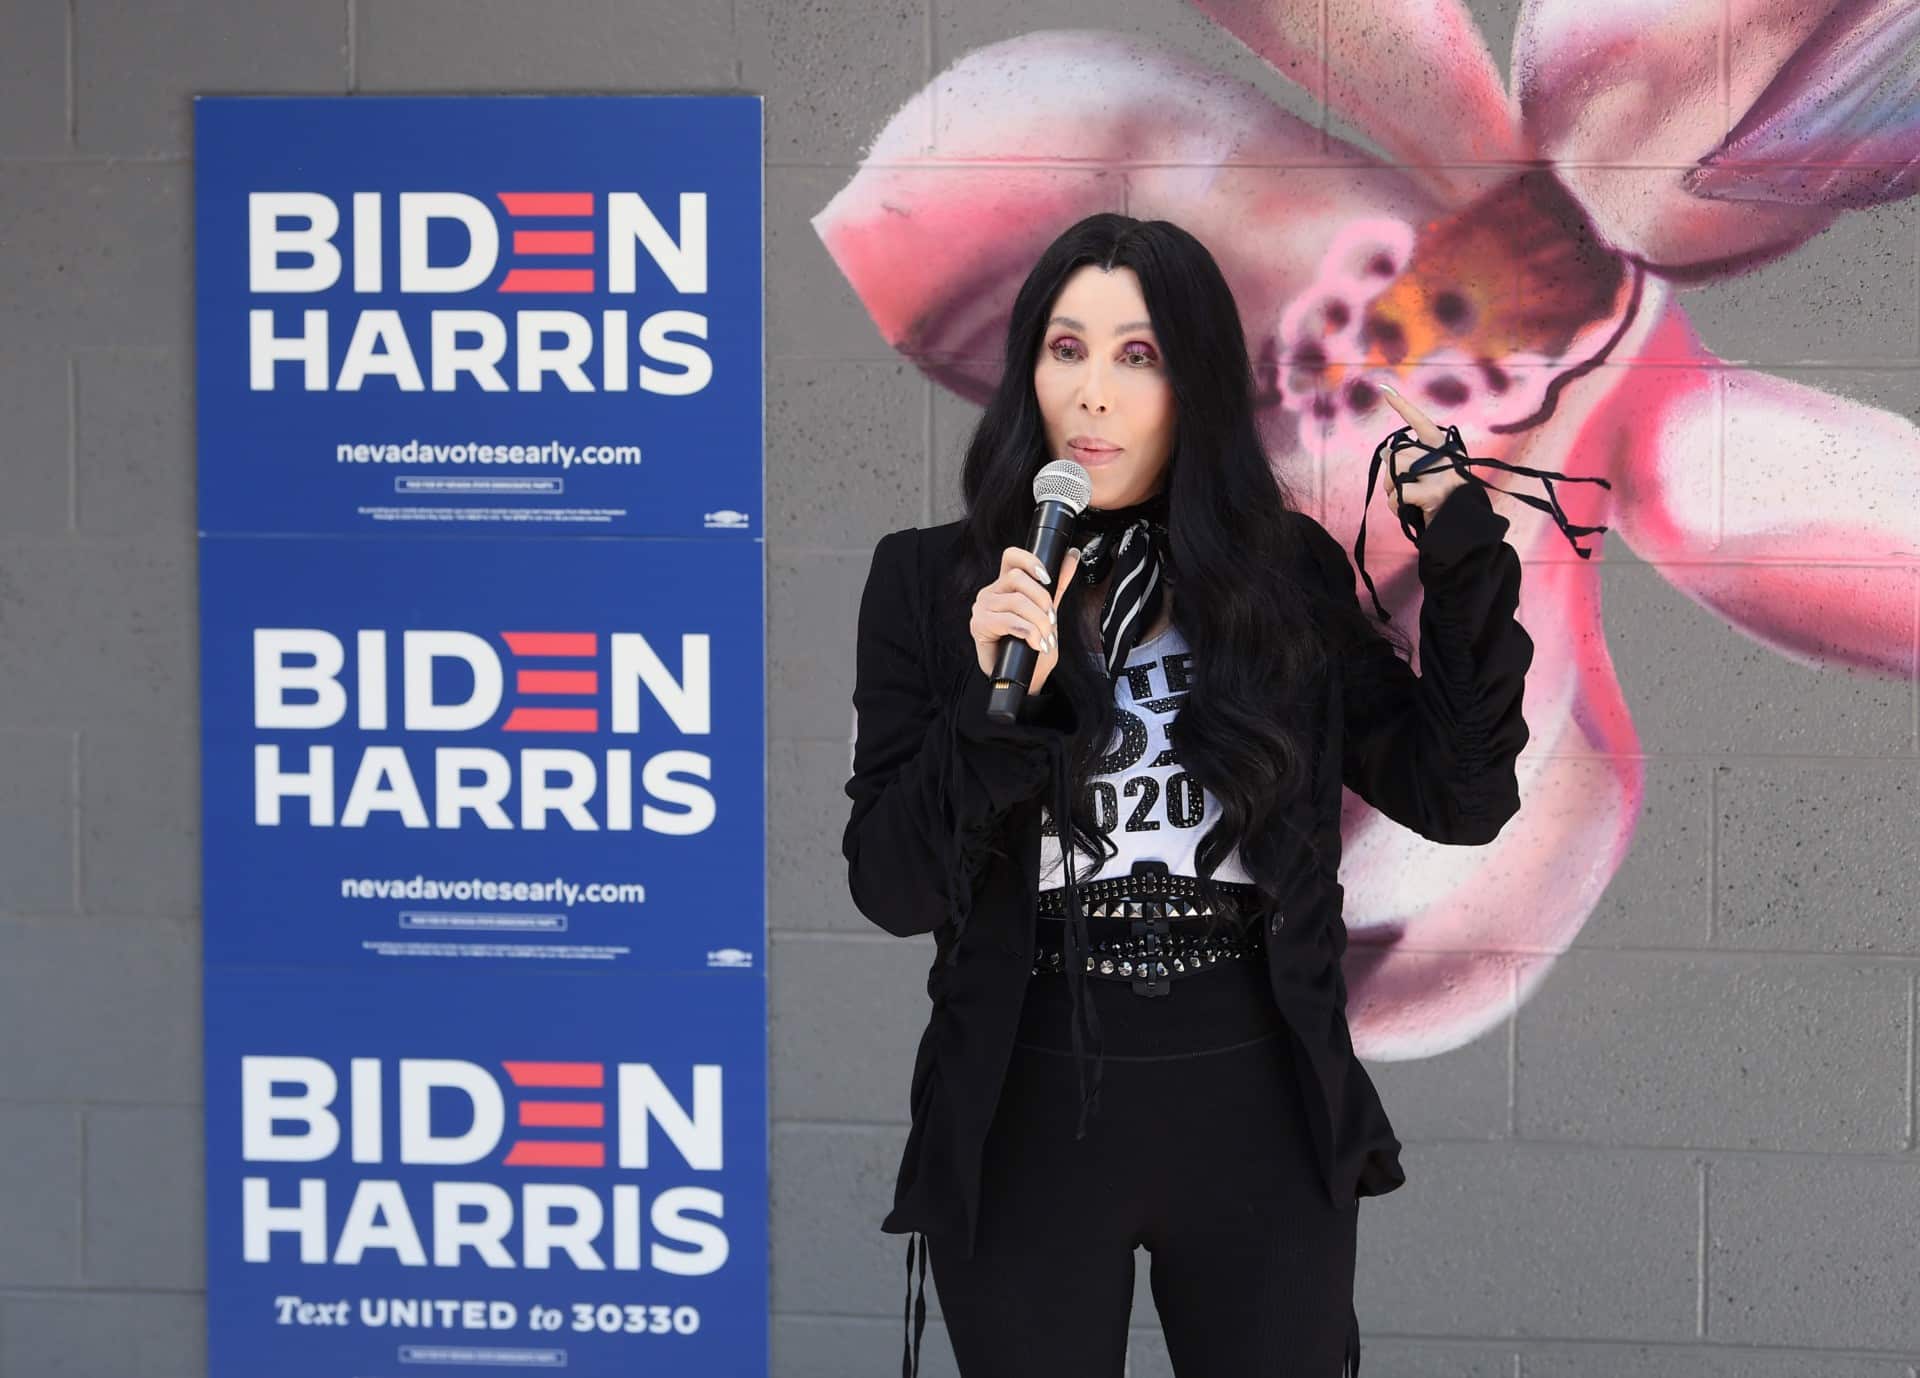 Cher Freaks After Youngkin Election: 'GOP Are Nazis,' will
Make America a 'Whites Only Club' 1